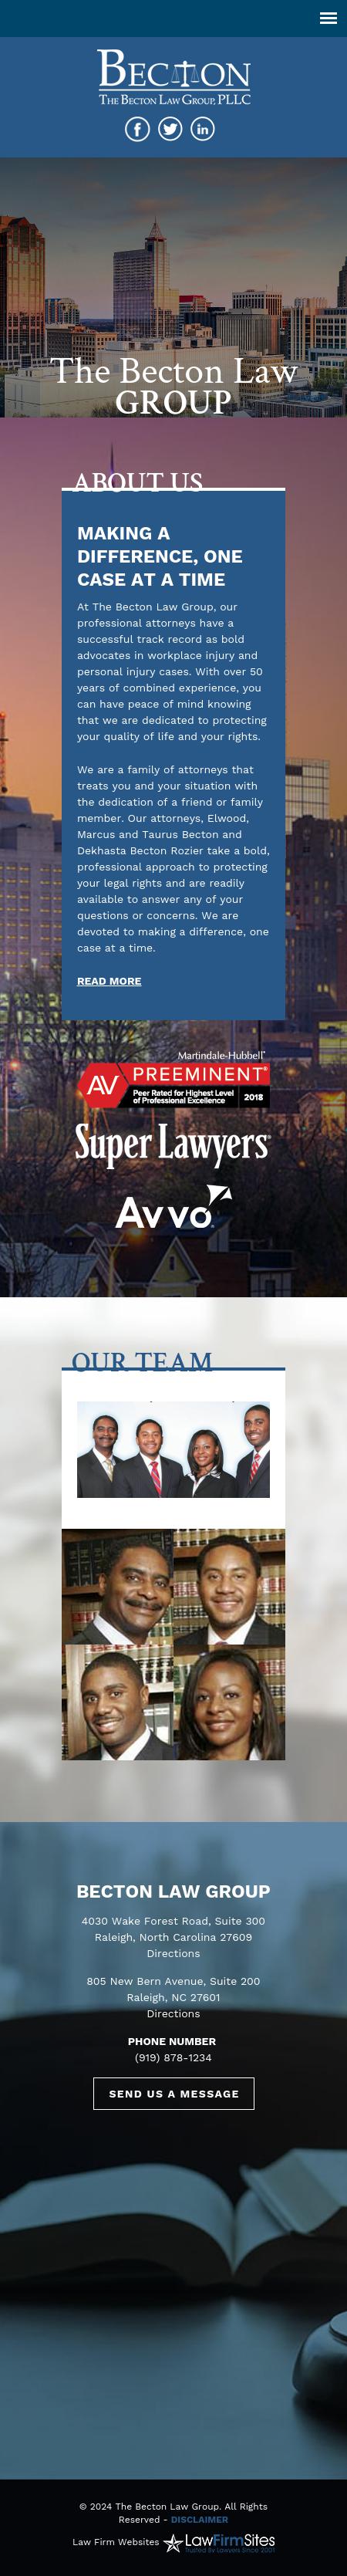 The Becton Law Group - Raleigh NC Lawyers